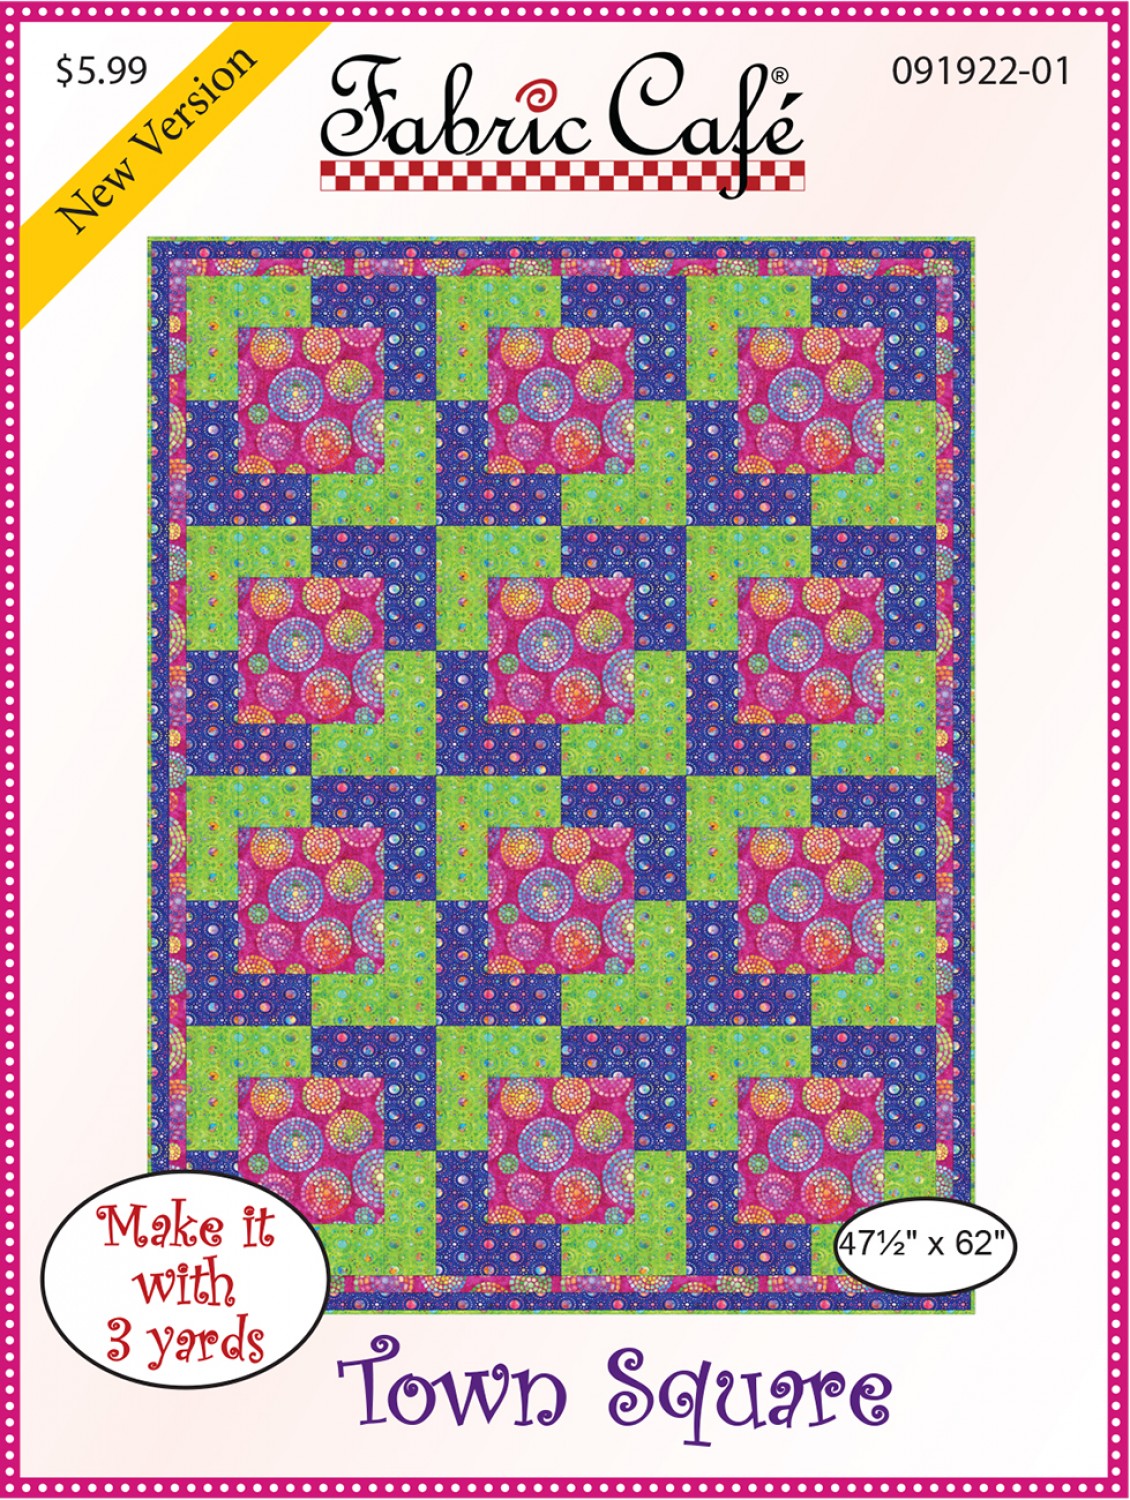 Town Square - 3 yard Quilt